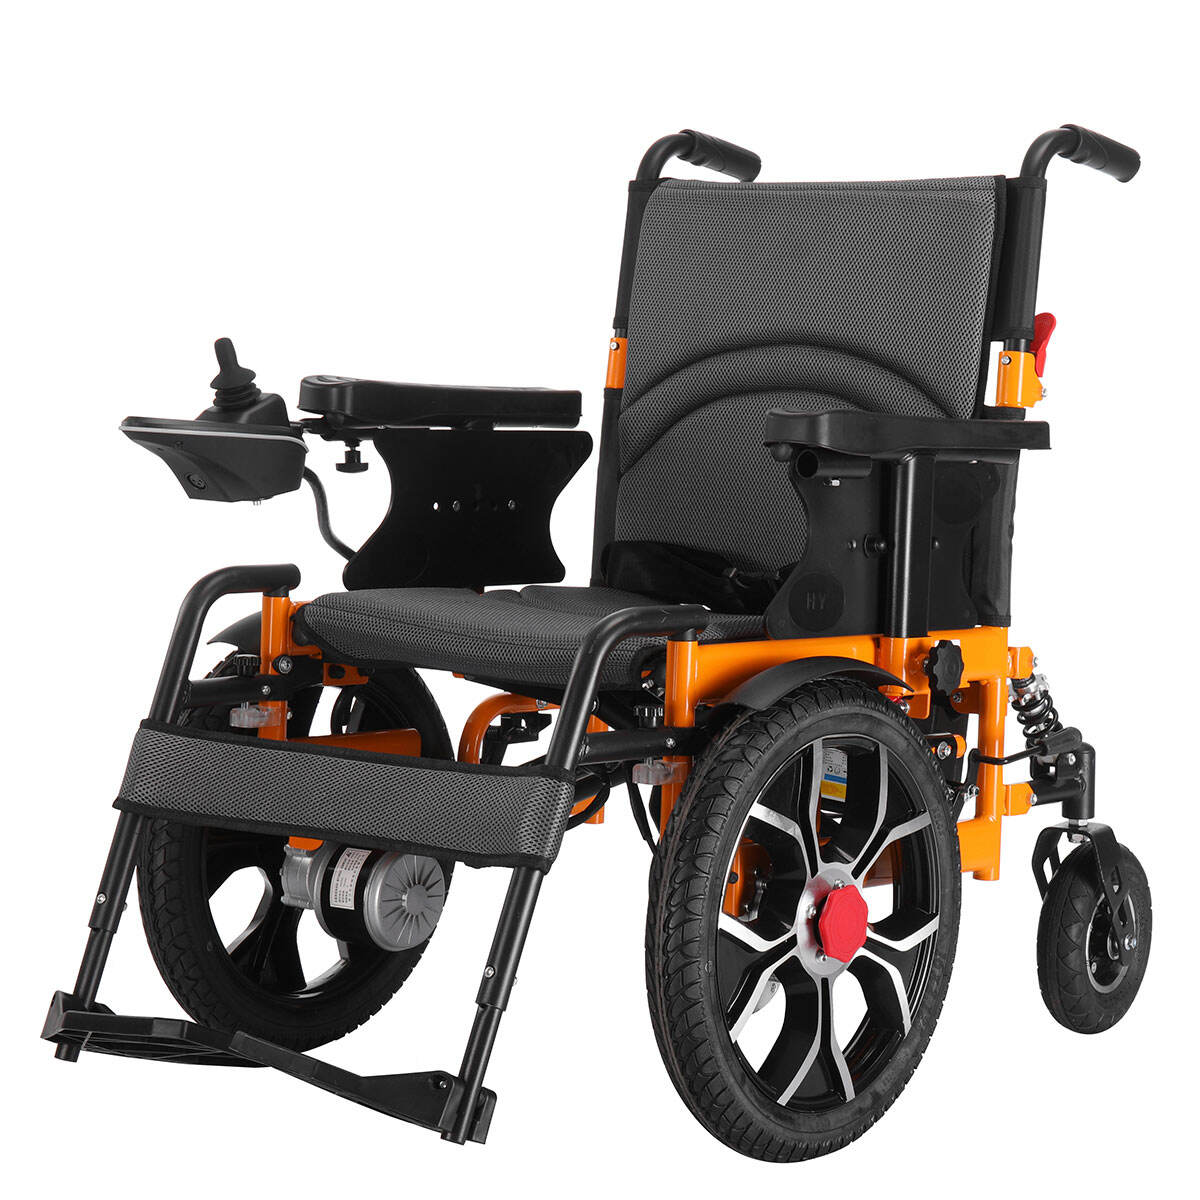 BC-ES600202 CE Approved Electric Wheelchair For Disabled